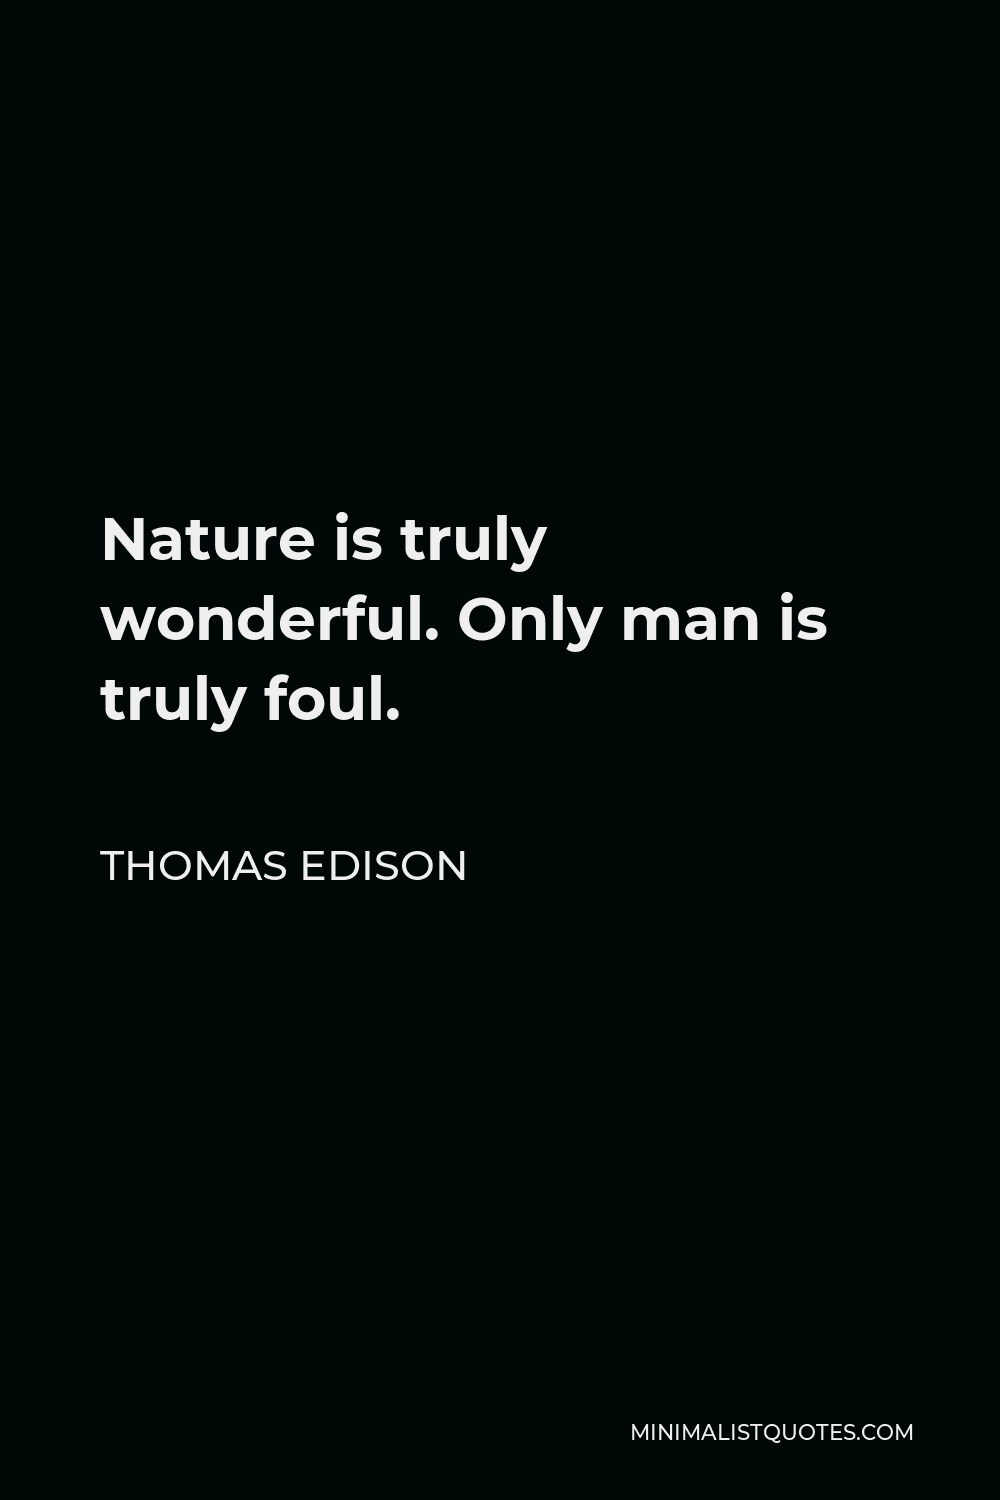 Thomas Edison Quote - Nature is truly wonderful. Only man is truly foul.